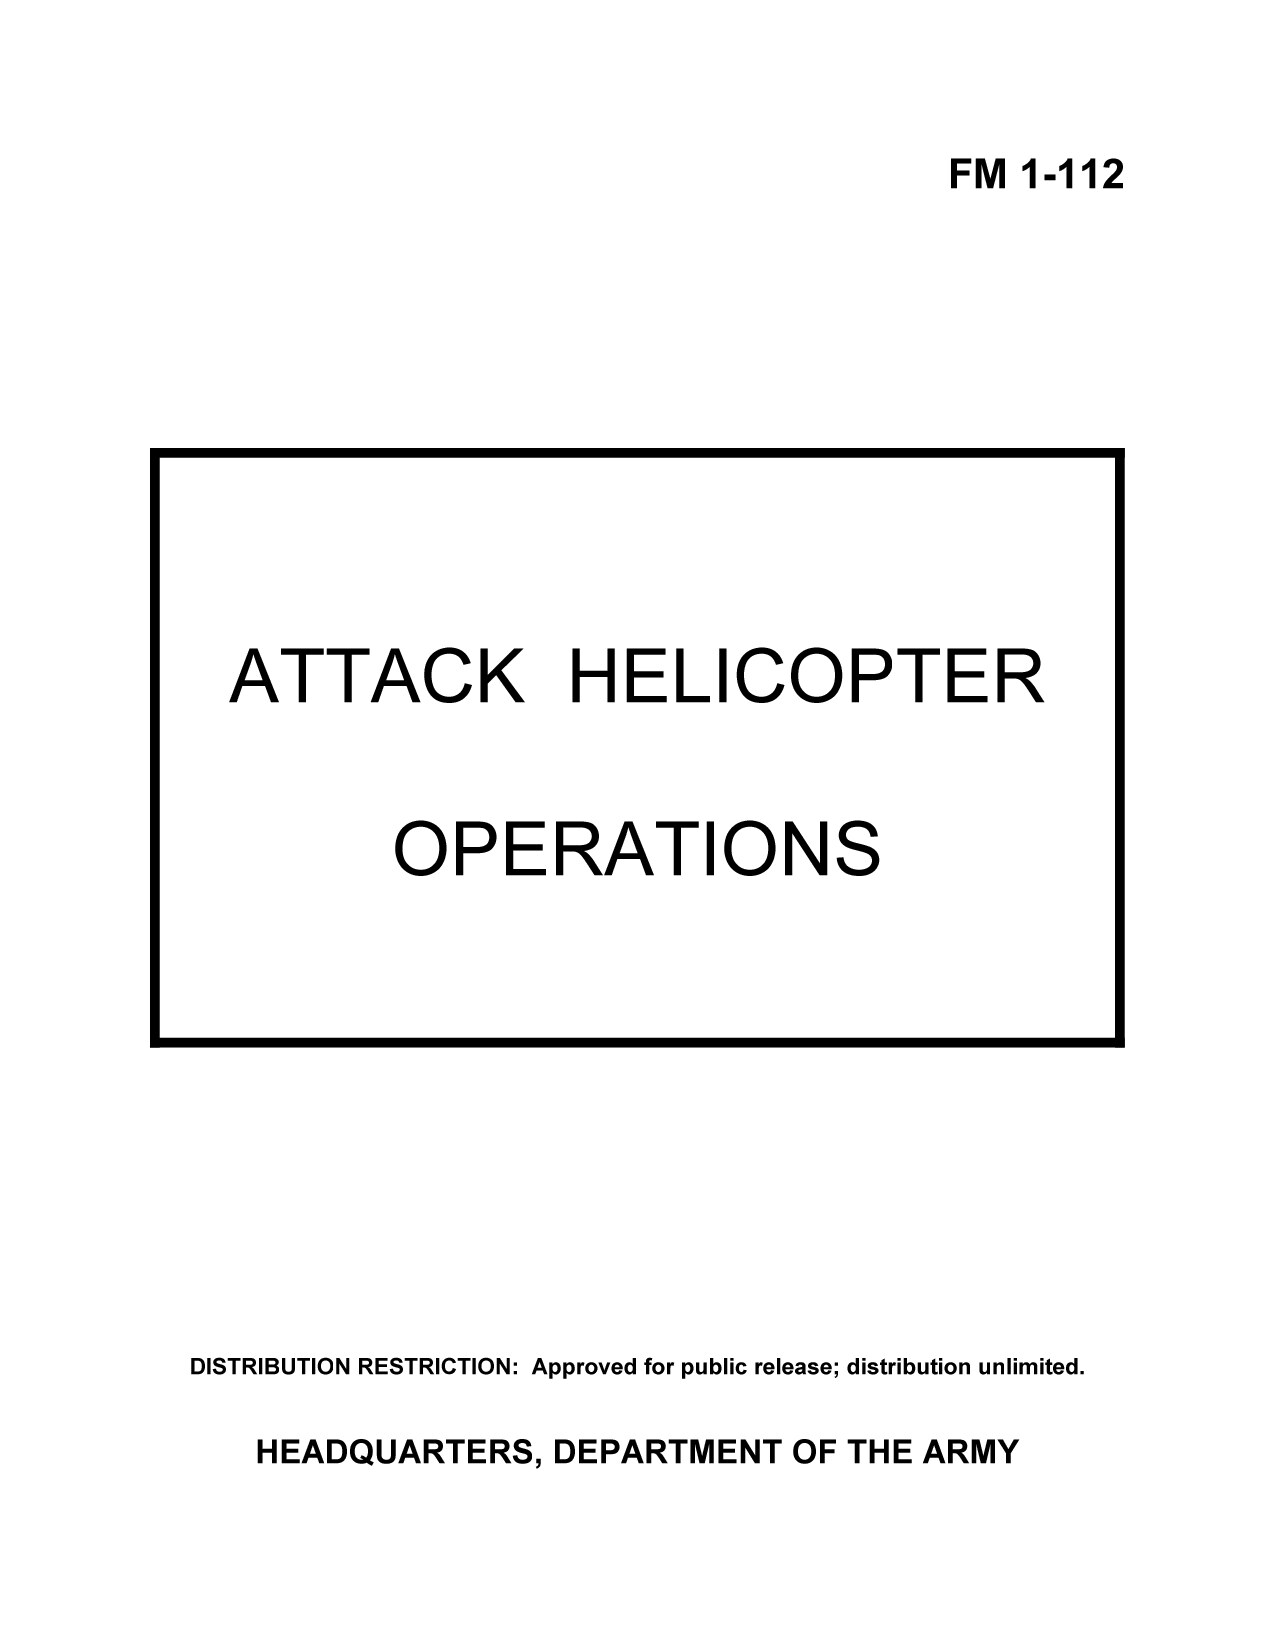 FM 1-112 - ATTACK HELICOPTER OPERATIONS